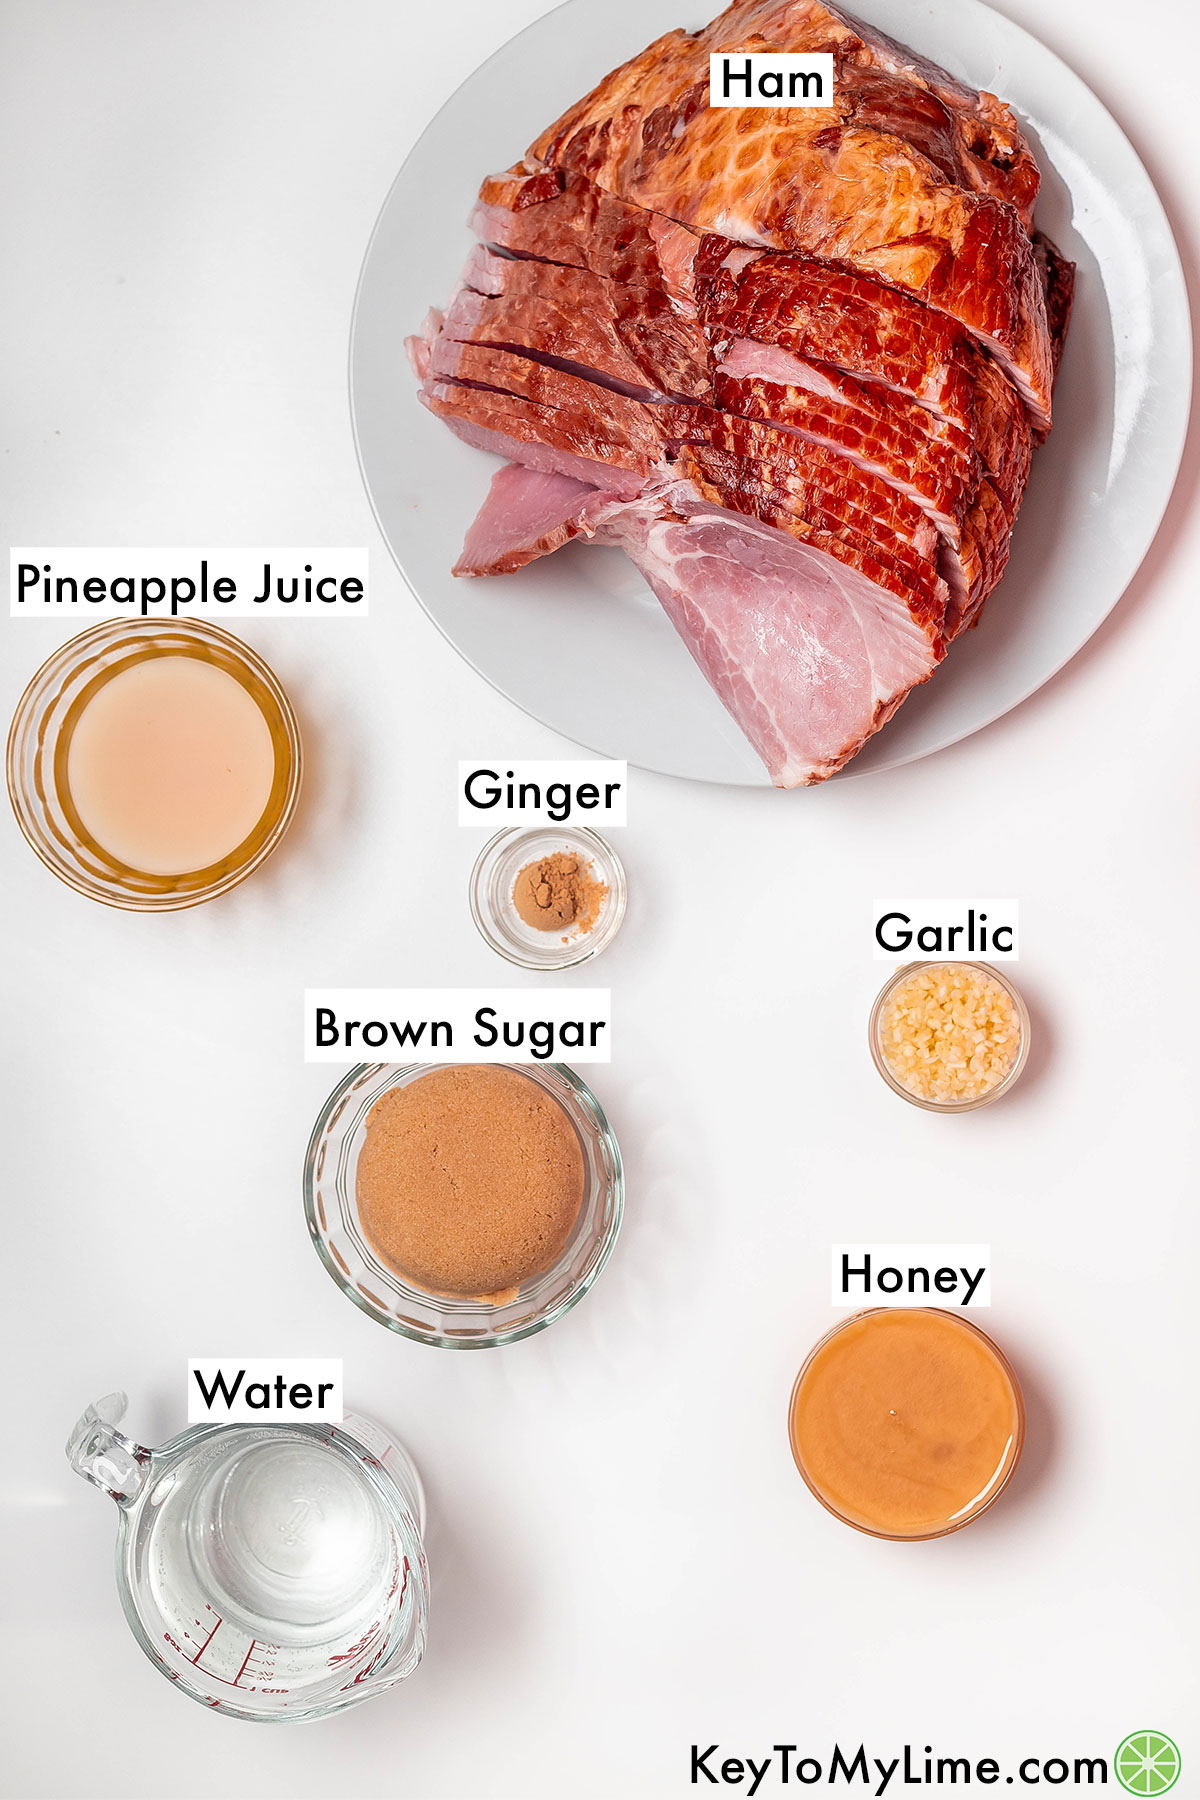 The labeled ingredients for Instant Pot ham.